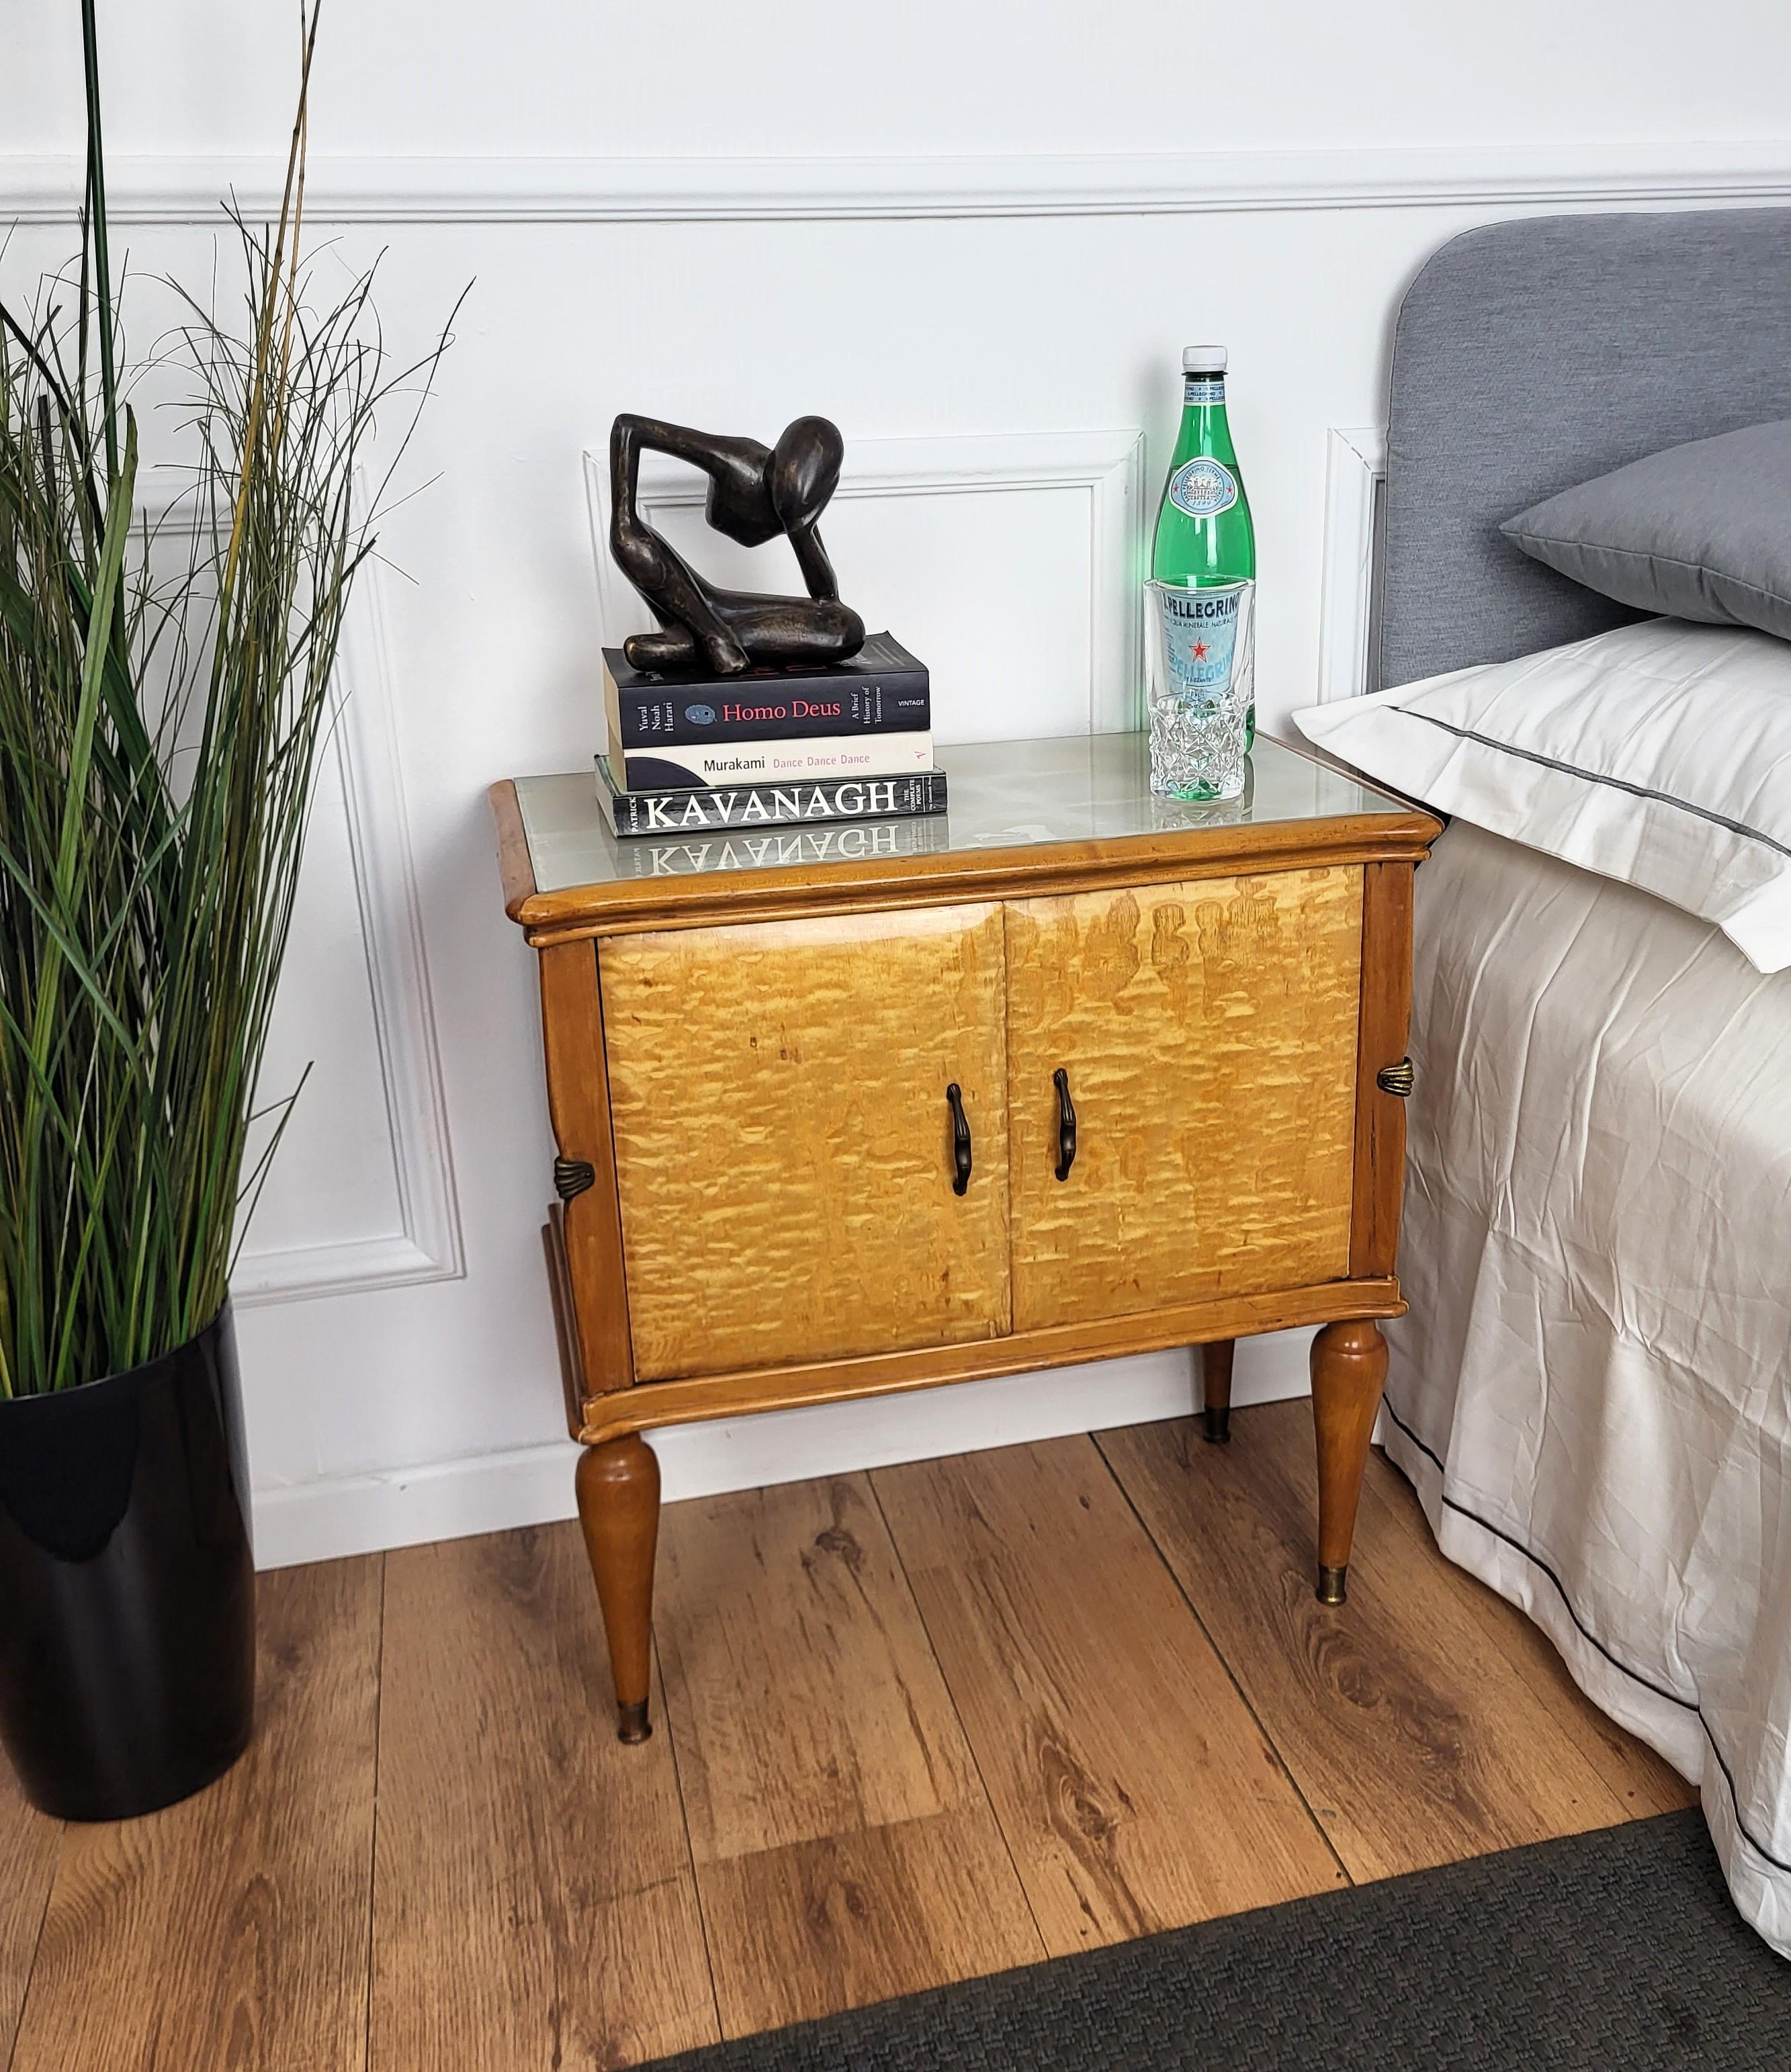 Very elegant and refined Italian 1950s Mid-Century Modern pair of bedside tables with great design of the white maple wood on the frontal door with brass handles and lacquered glass top. The great vintage shape and design, as well as the brass